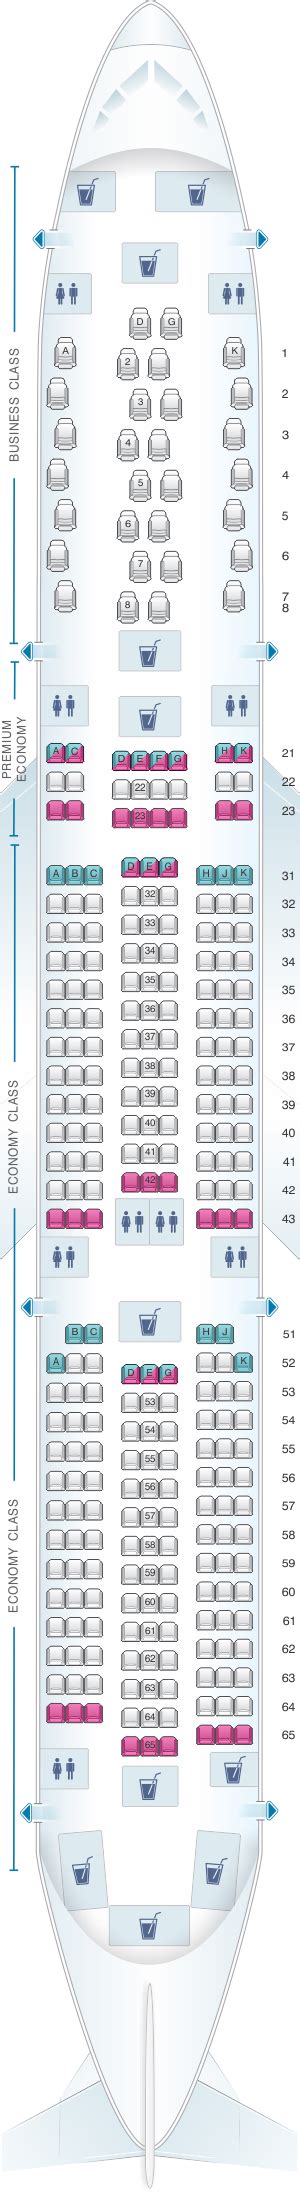 Seat Map And Seating Chart Airbus A Ethiopian Airlinesethiopian